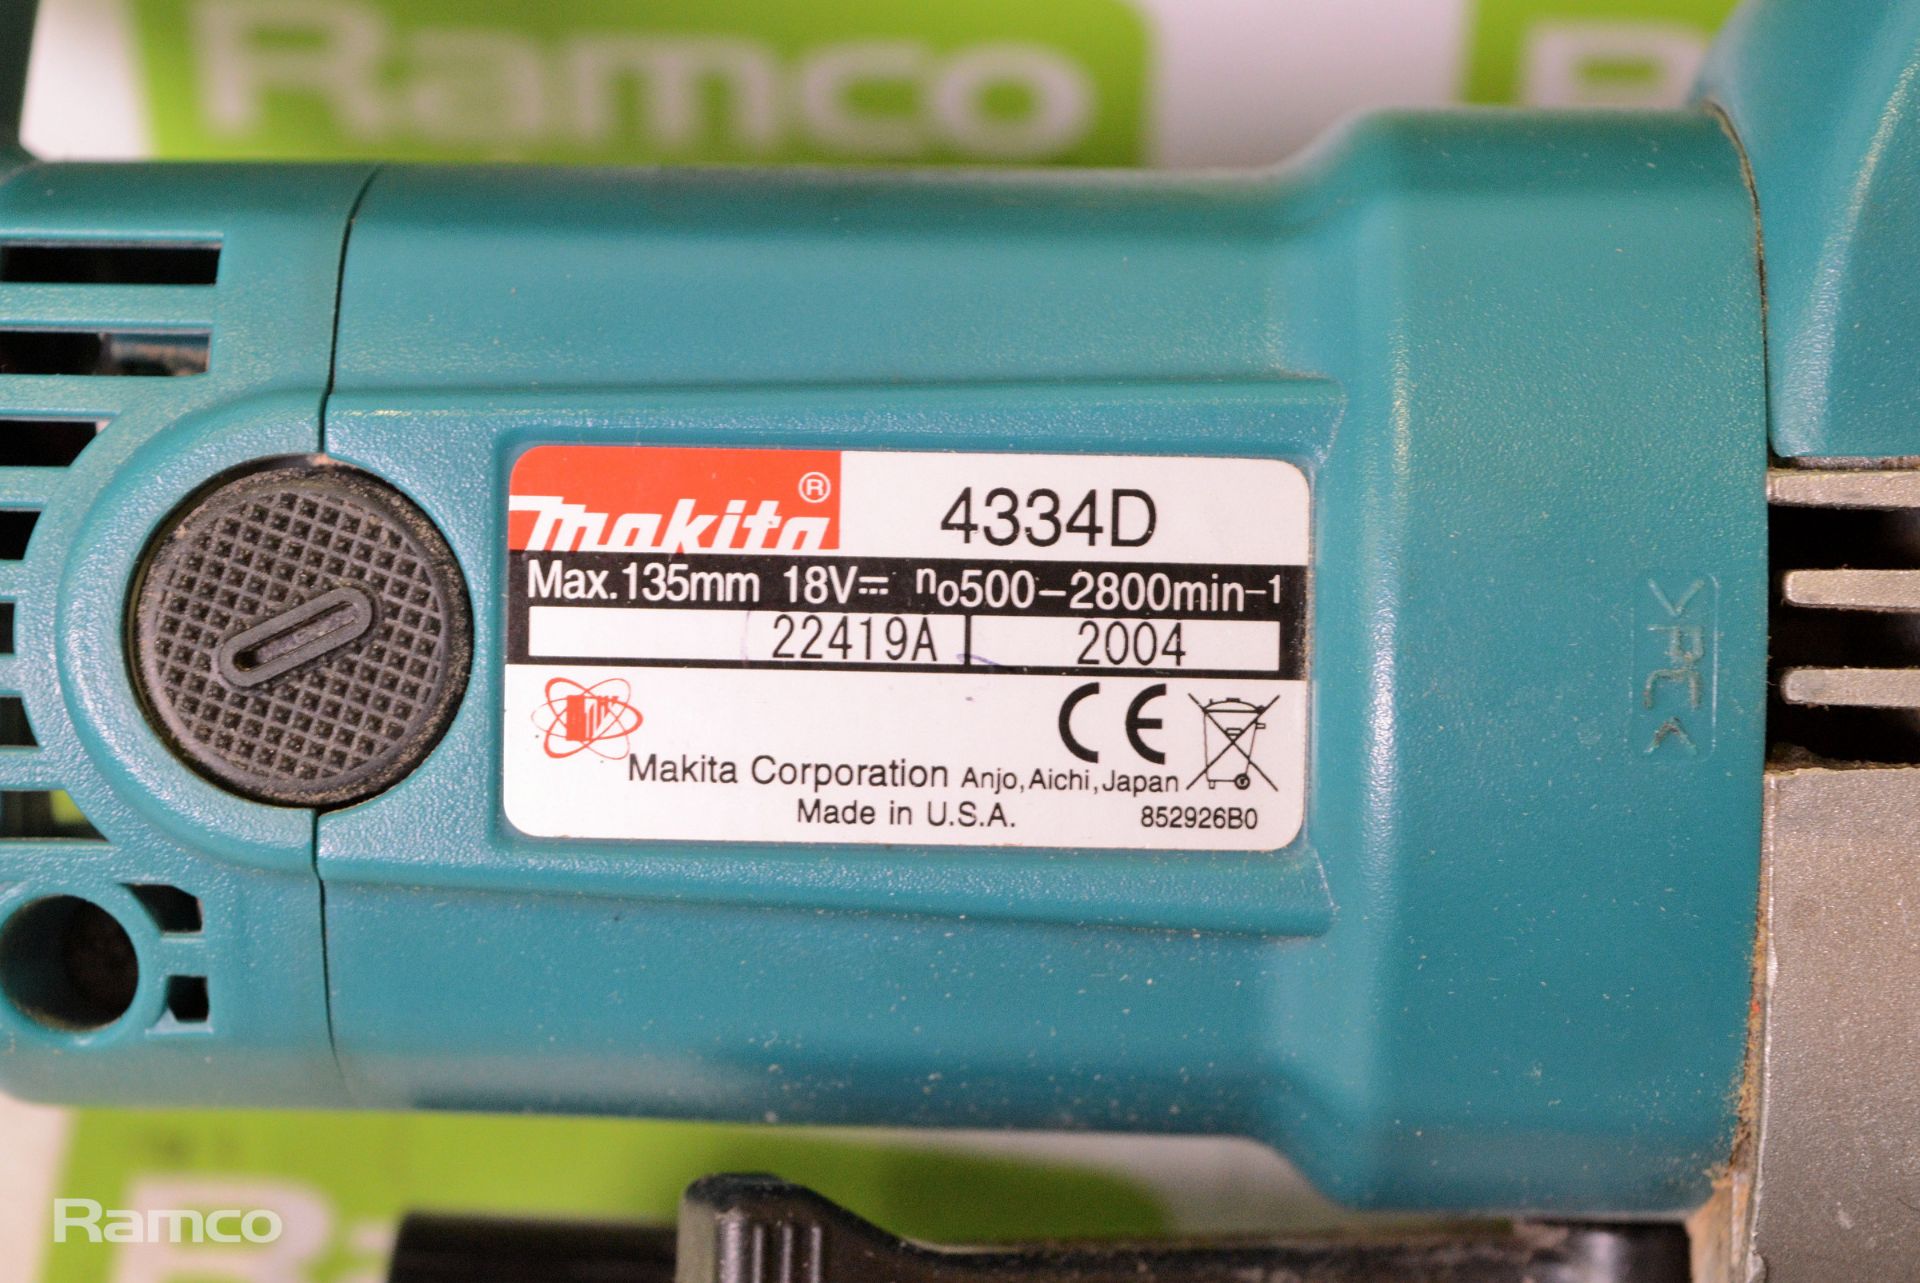 Makita 4334D cordless jigsaw + charger + battery + case - Image 6 of 7